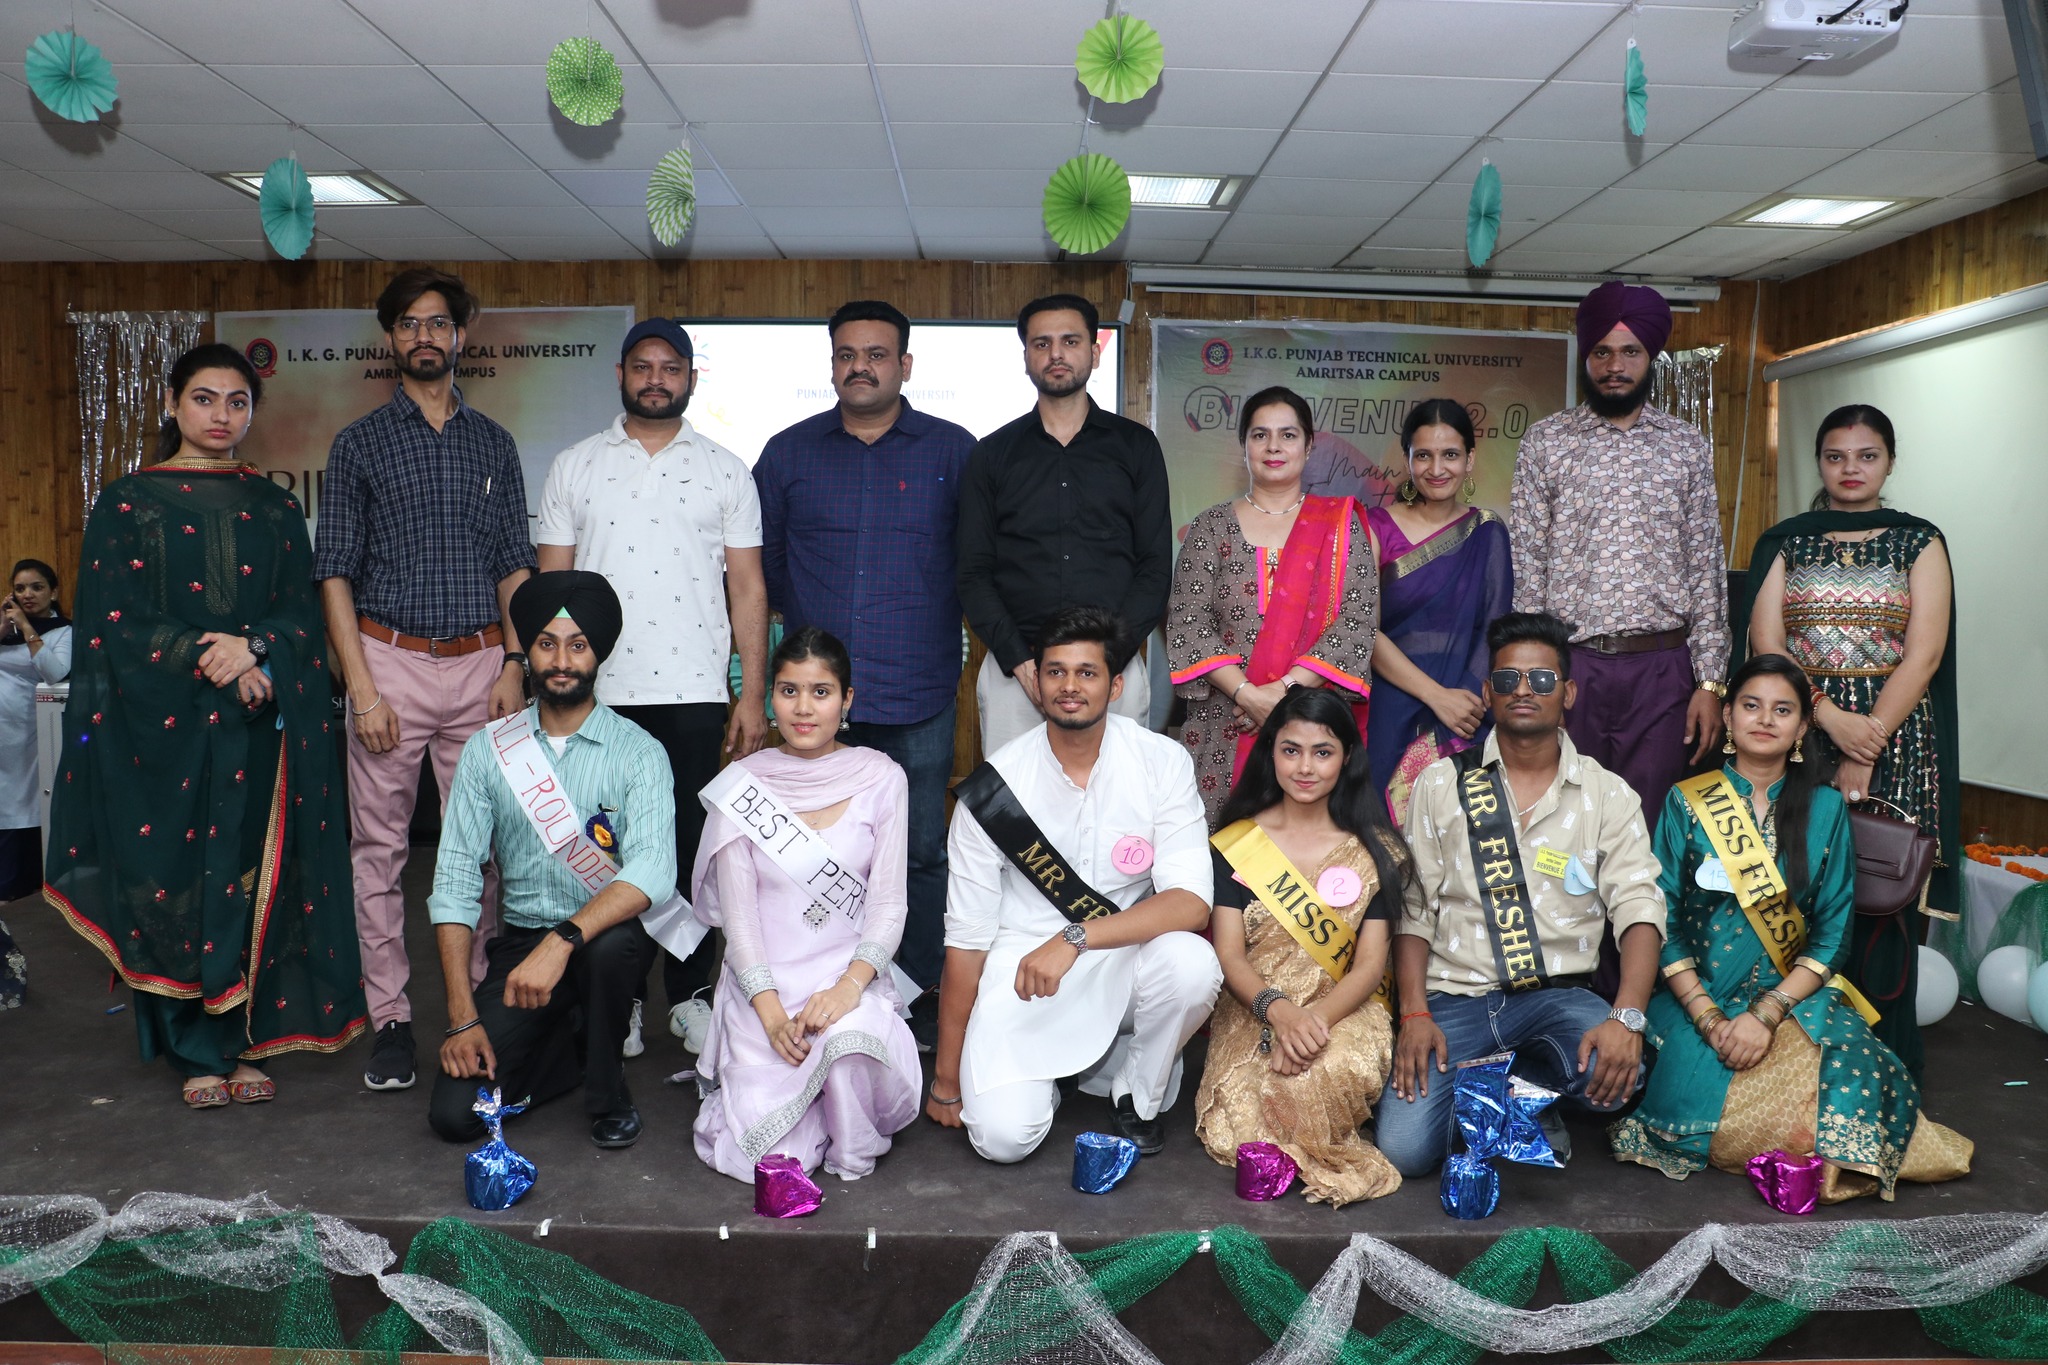 IKGPTU Amritsar Campus organized a Freshers Party on 26th April 2022